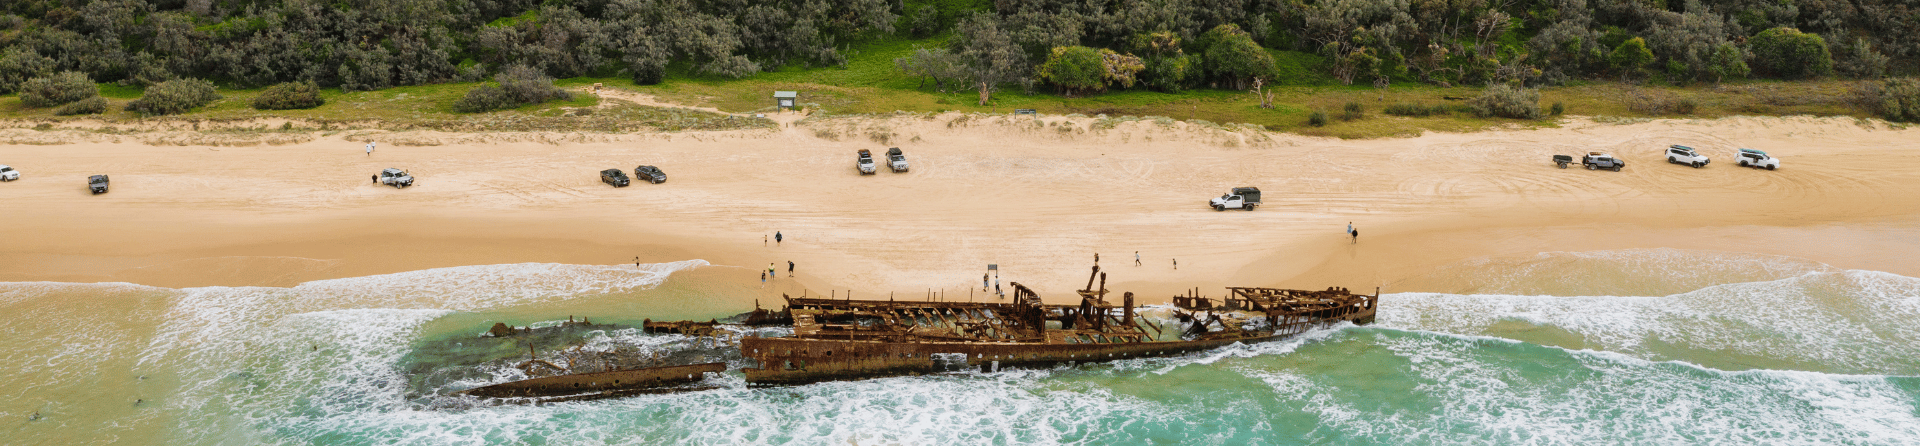 Why is the Maheno Shipwreck so famous?